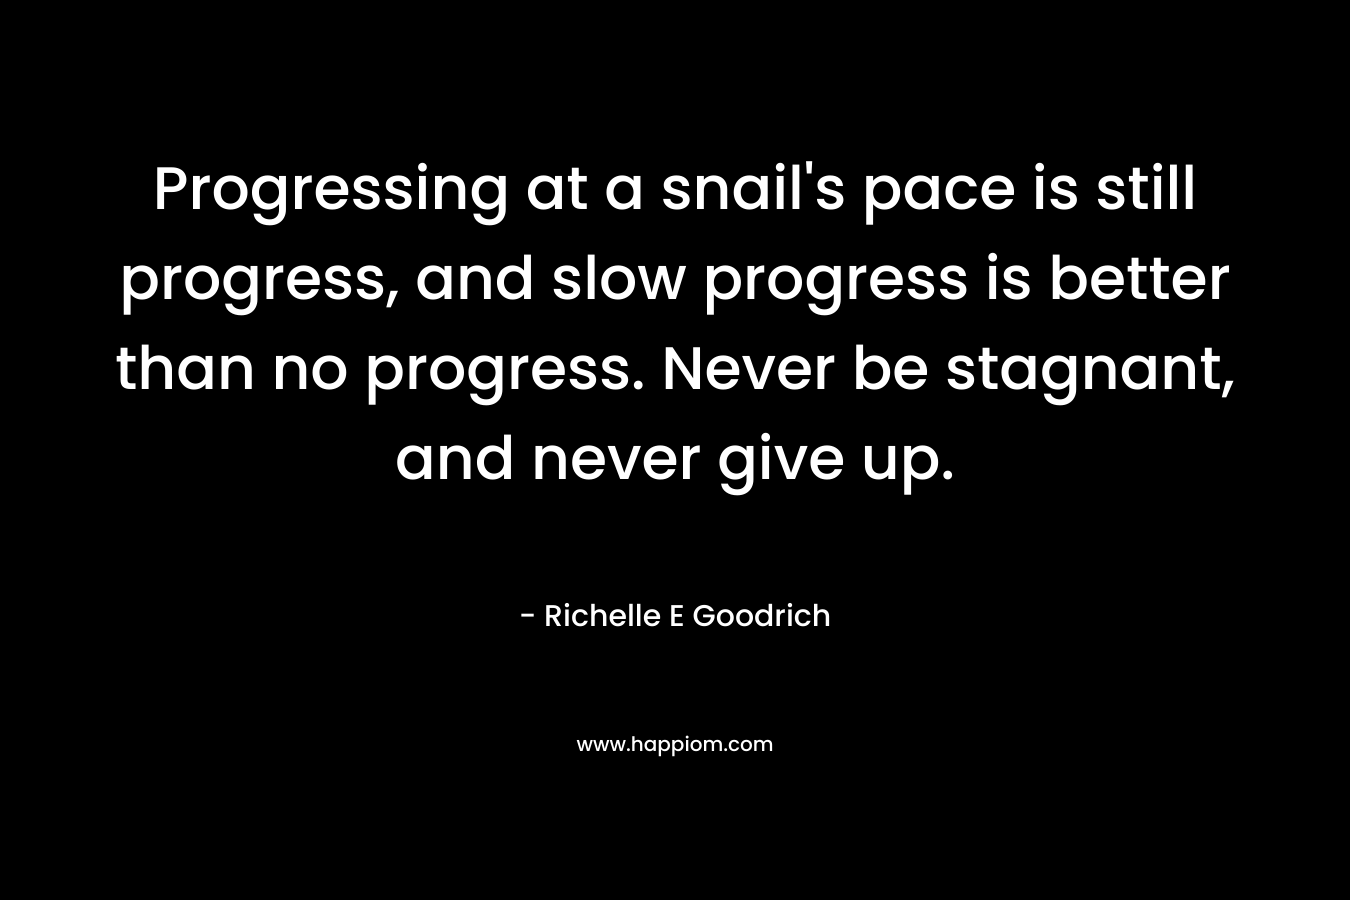 Progressing at a snail's pace is still progress, and slow progress is better than no progress. Never be stagnant, and never give up.